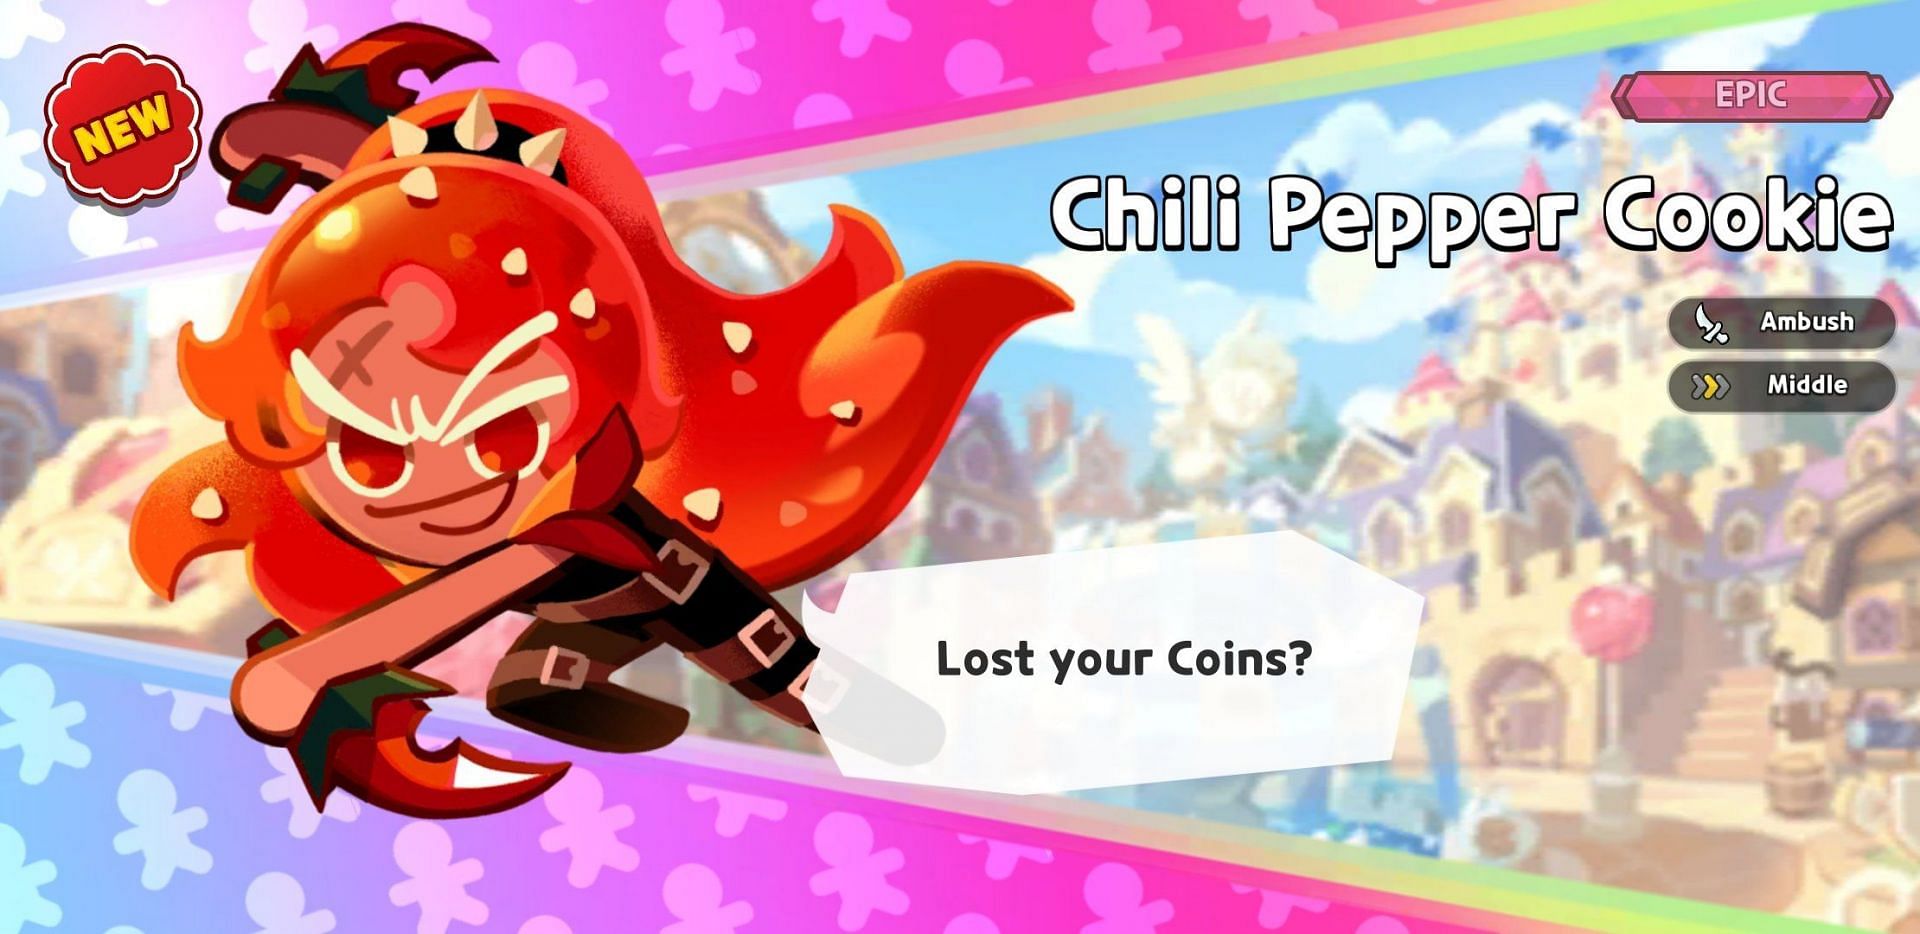 Chili Pepper Cookie is a popular character from OvenBreak, the parent game of Cookie Run: Kingdom (Image via @CatB0y_Simp69/Twitter)